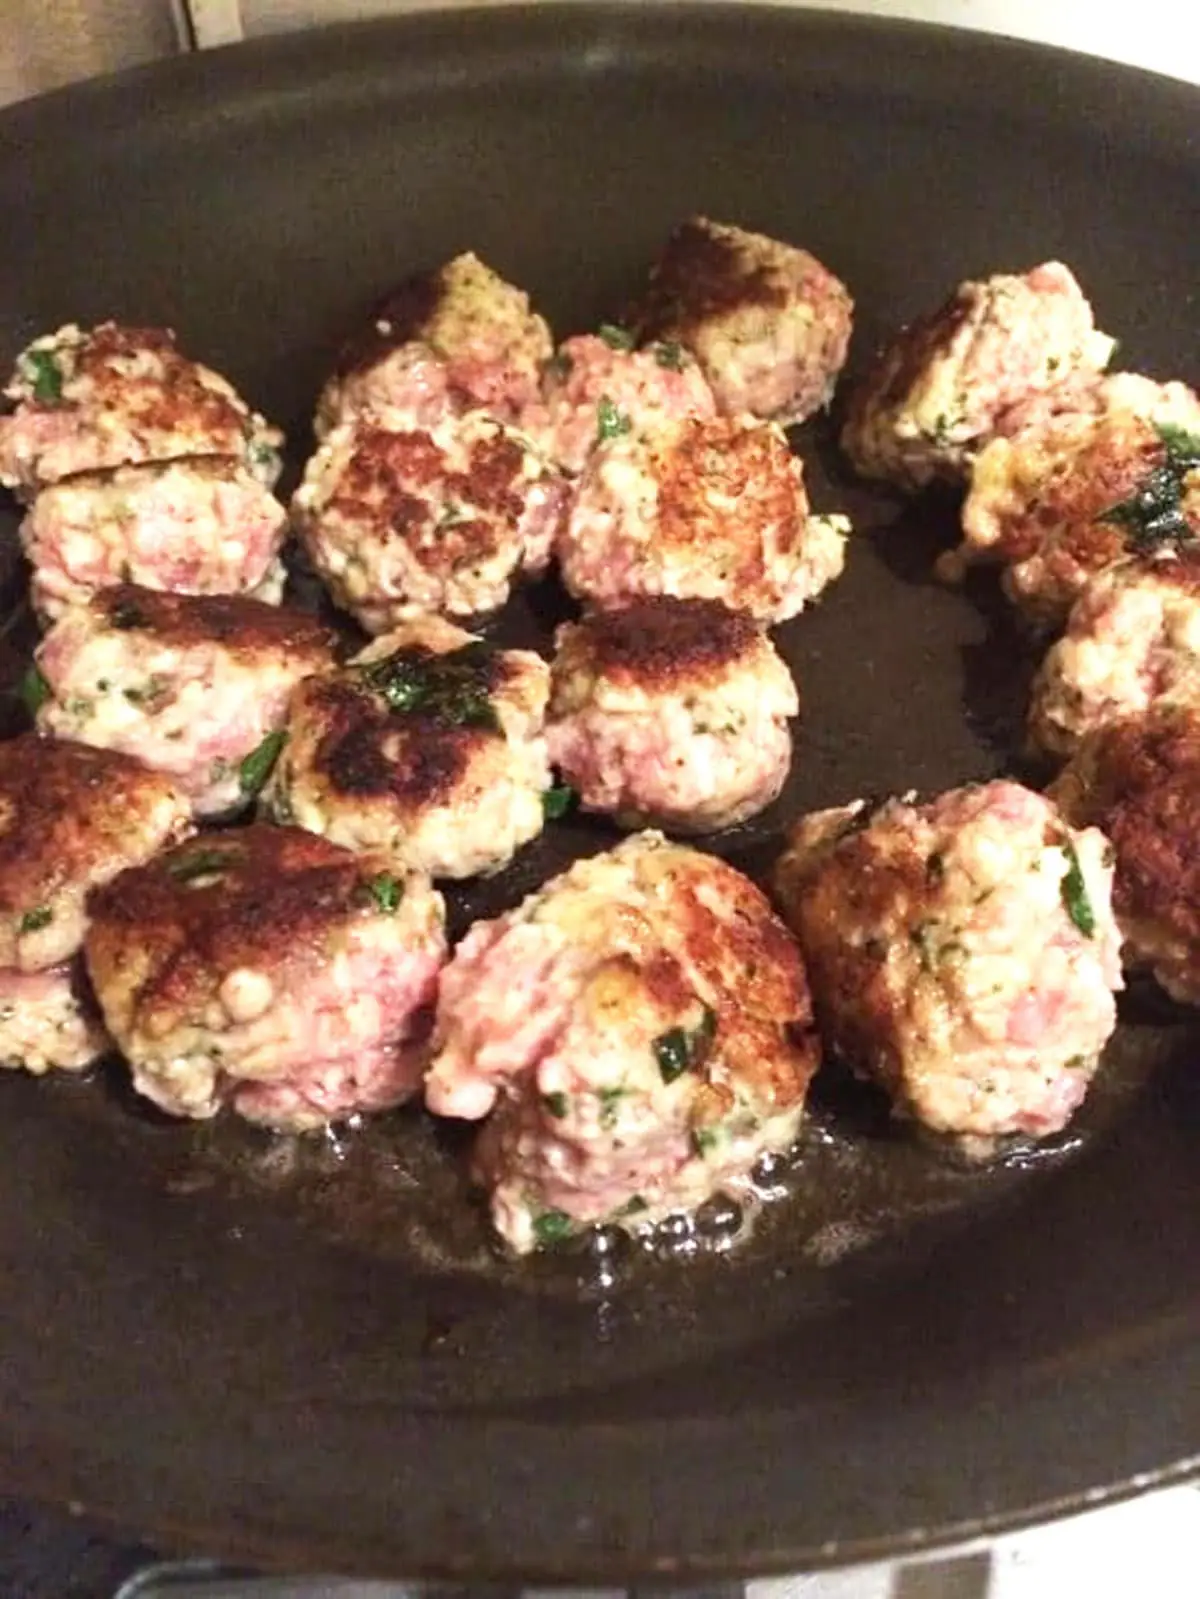 meatballs cooking in a cast iron skillet